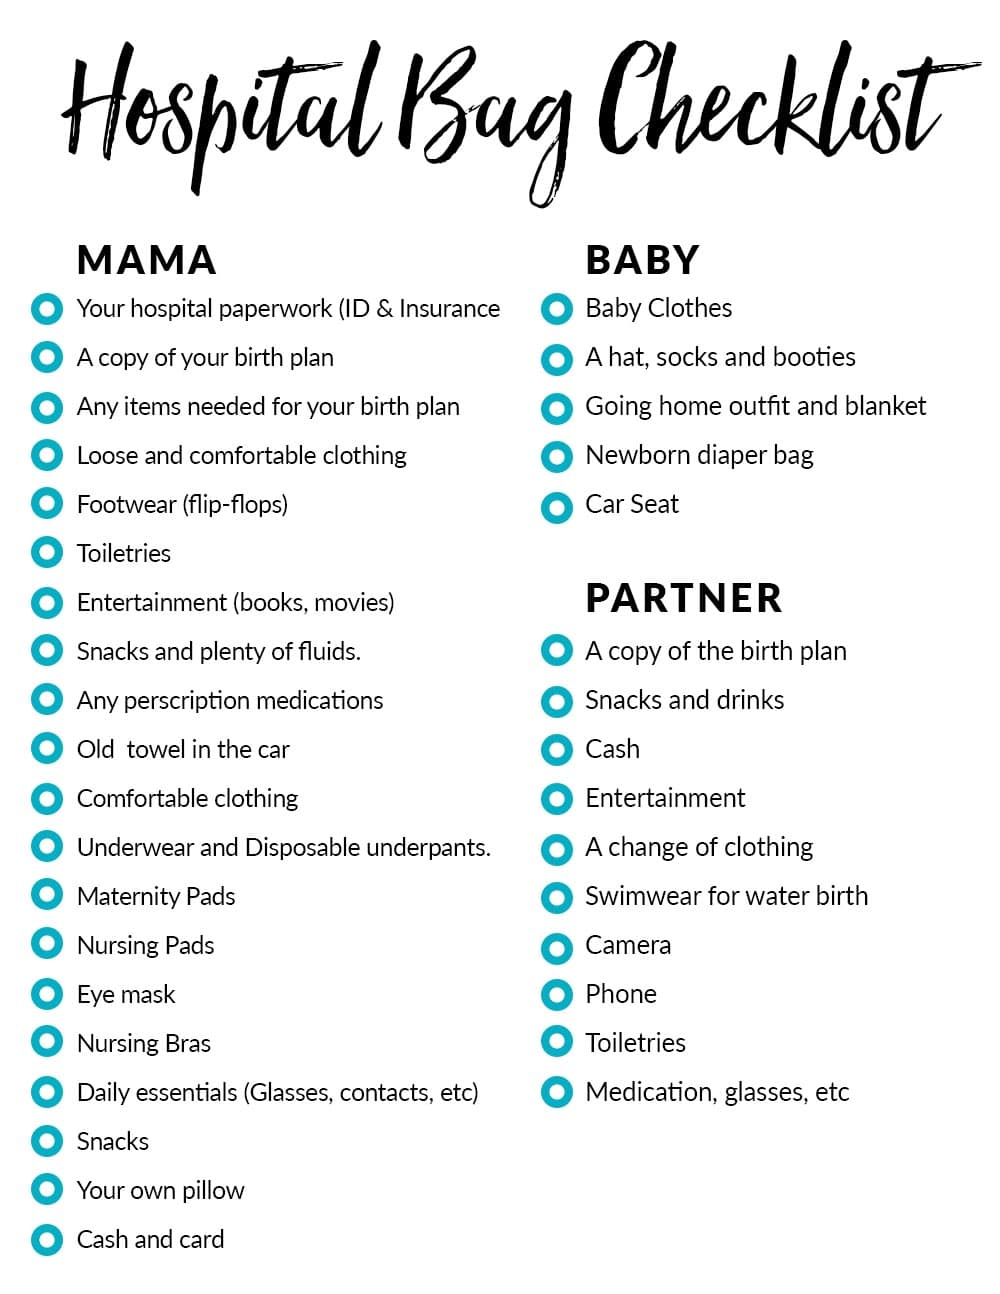 This Ultimate Hospital Bag Checklist will help you be prepared for everything you need to welcome your new baby! 